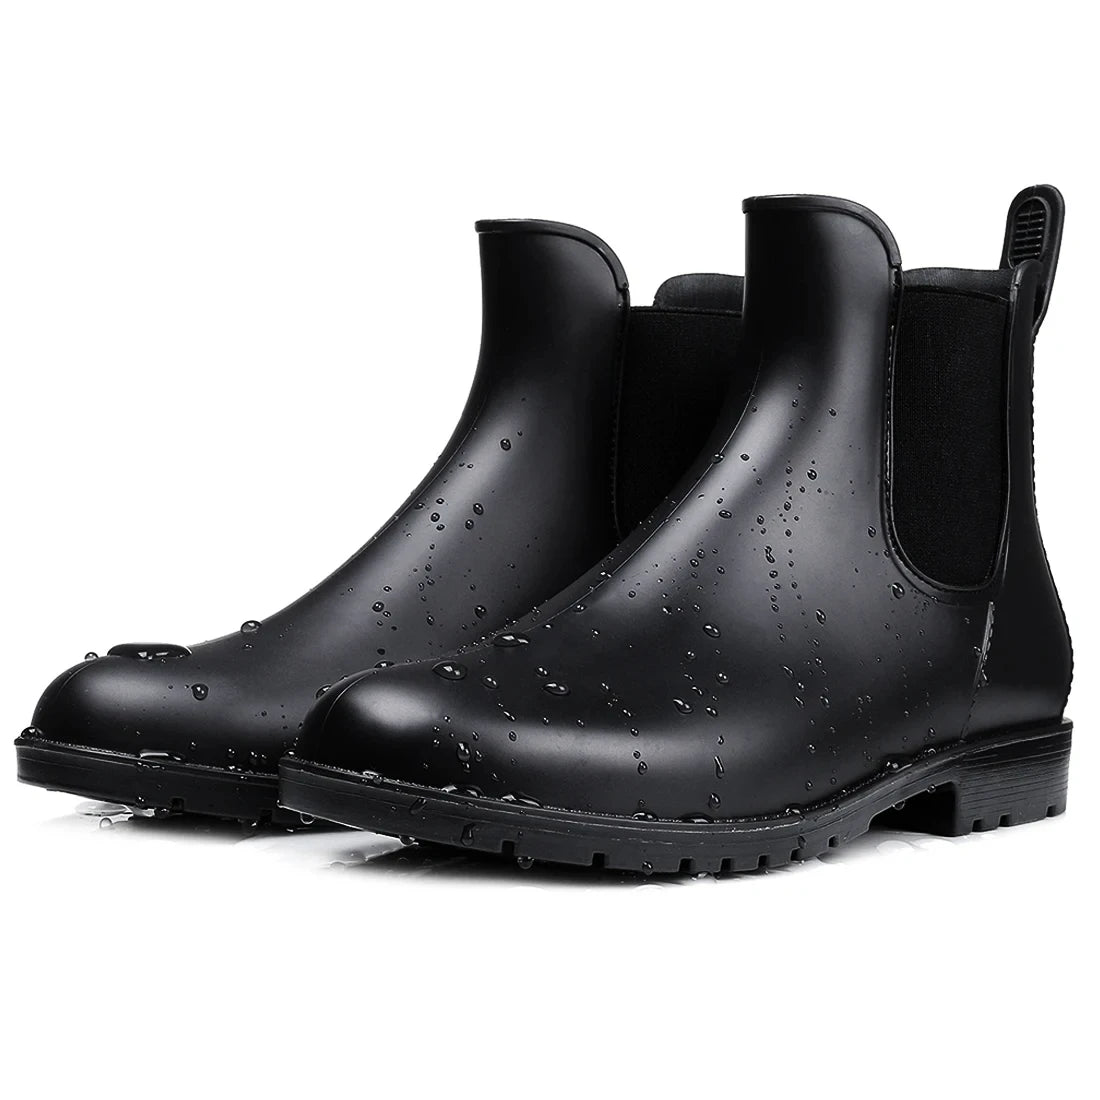 Women Fashion Chelsea Rain Boots Basic Shiny Ankle Boots Waterproof Shoes with Elastic Band Non-slip Comfortable Boots-Dollar Bargains Online Shopping Australia